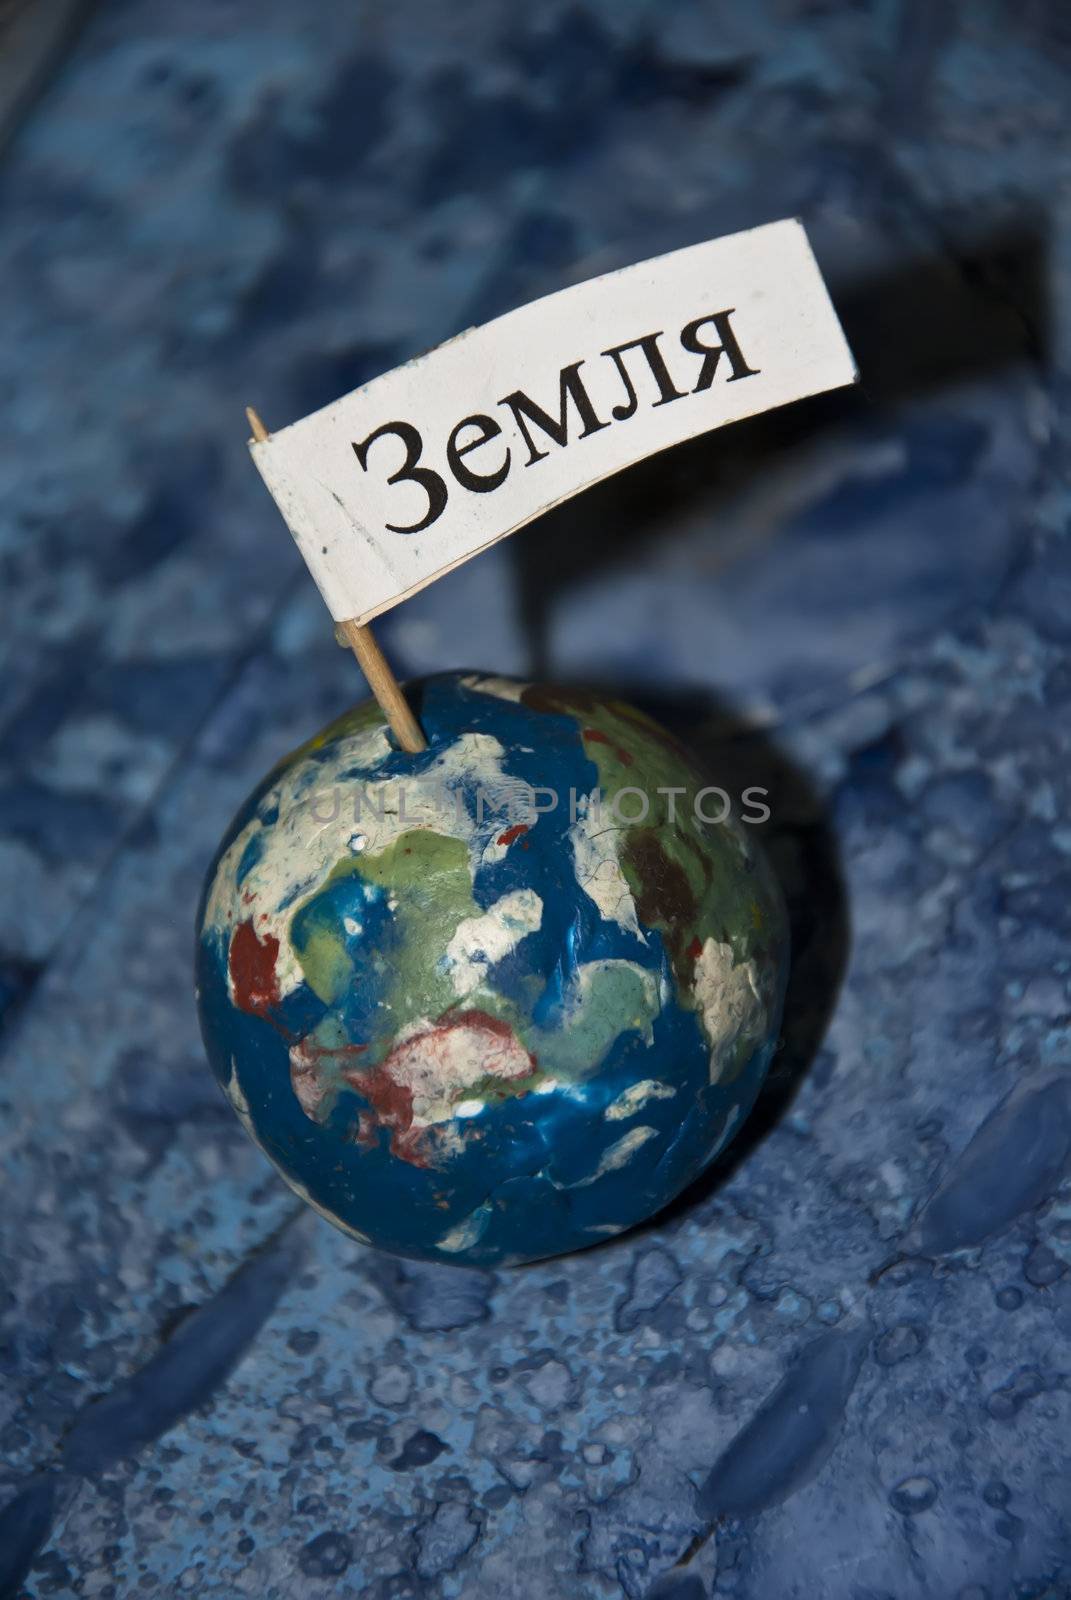 Planet of plasticine with russian word "Earth"